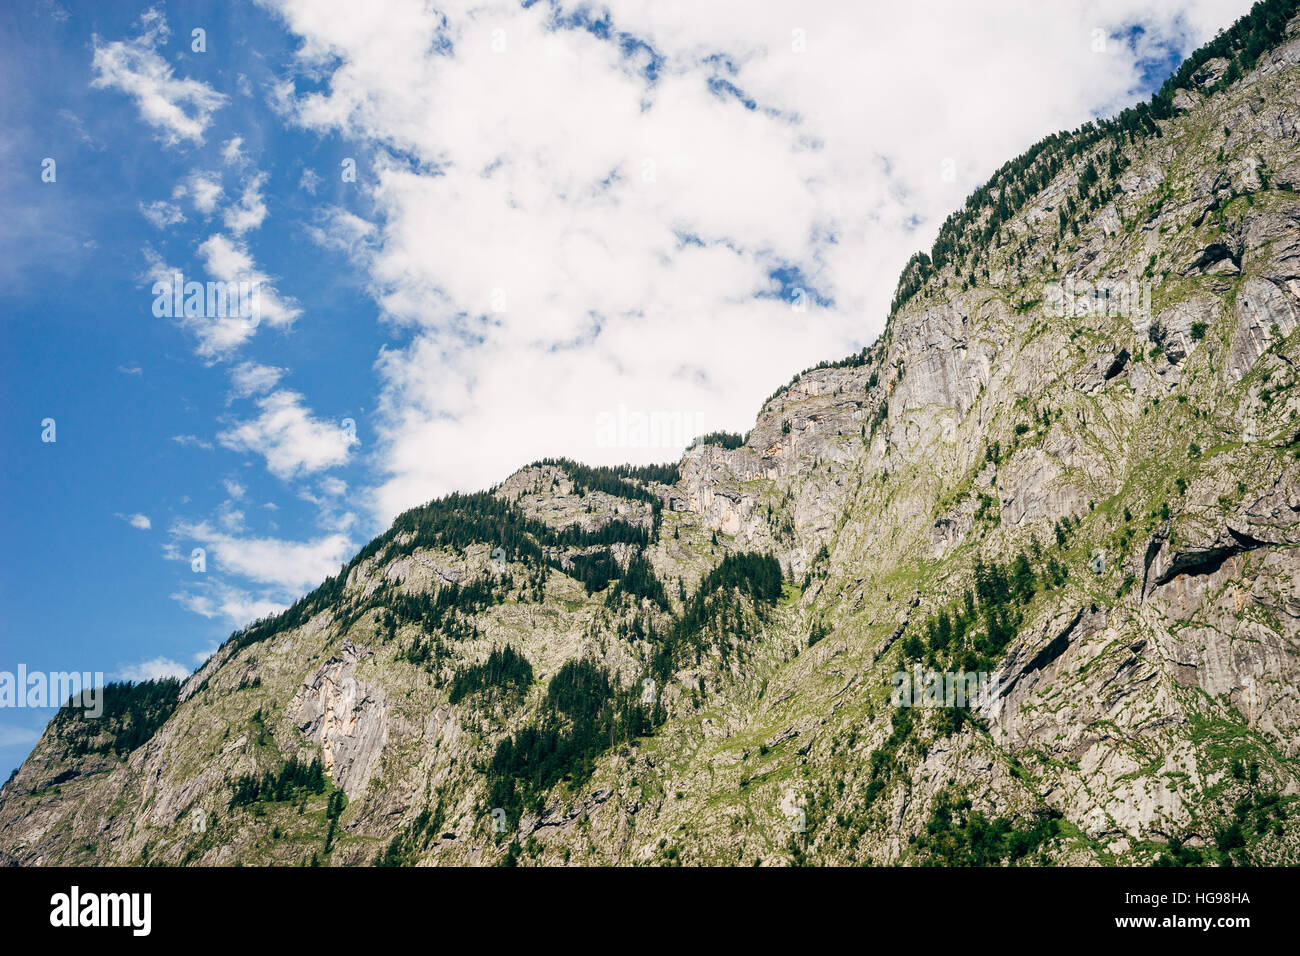 Massive mountain covered with trees and greenery against scenic cloudy sky Stock Photo